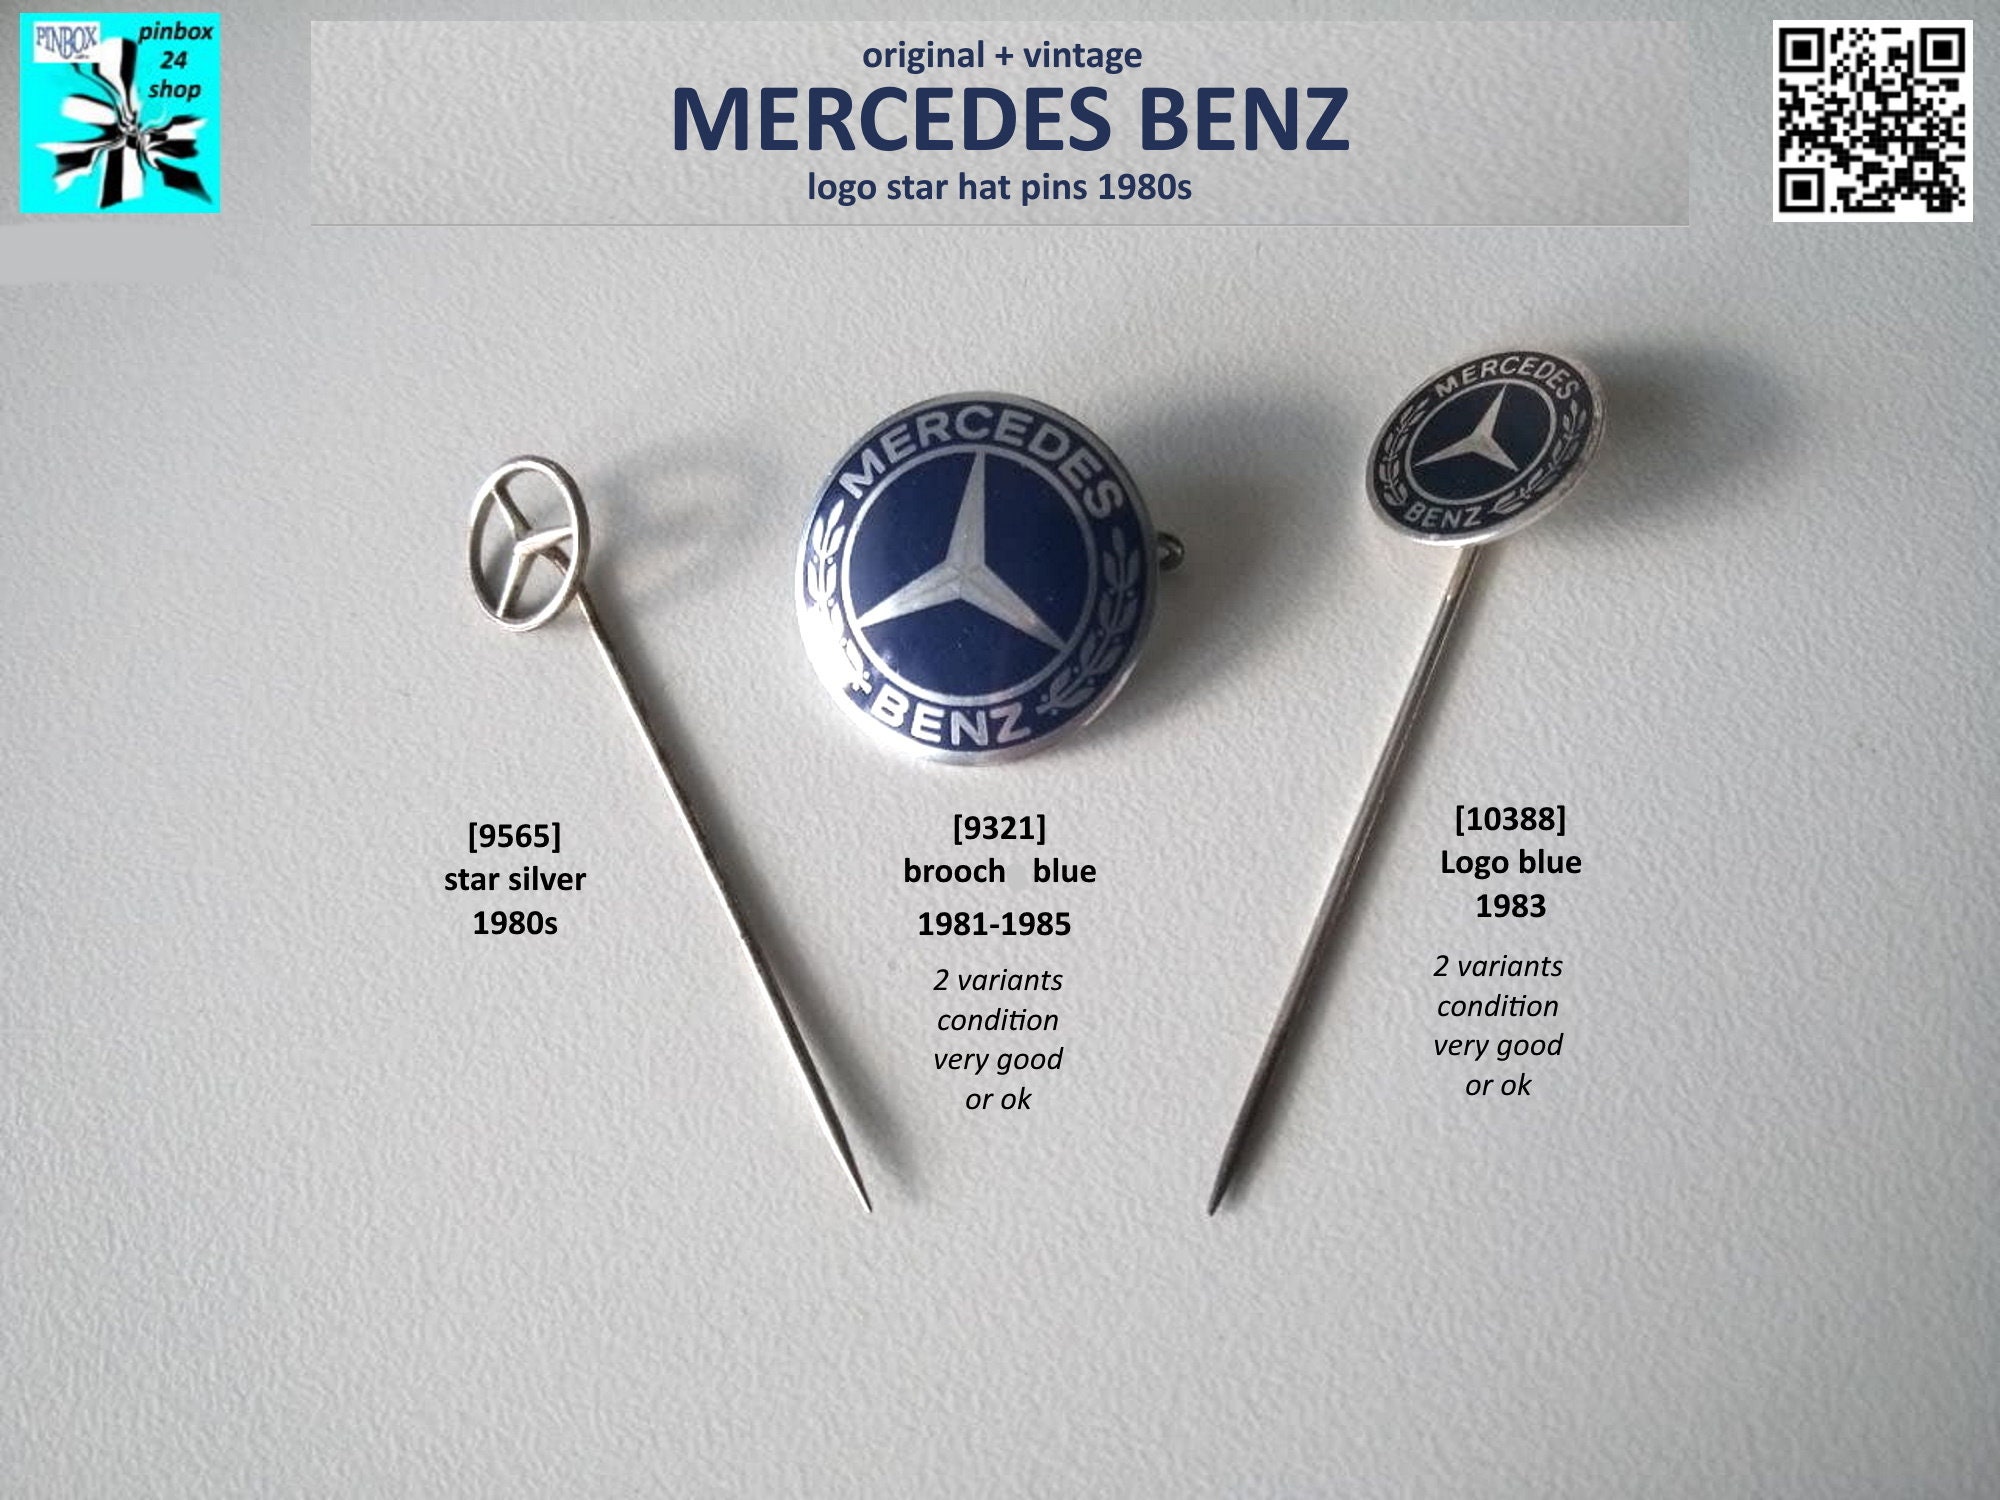 kultur rulletrappe Charles Keasing Mercedes Benz Accessories - Etsy